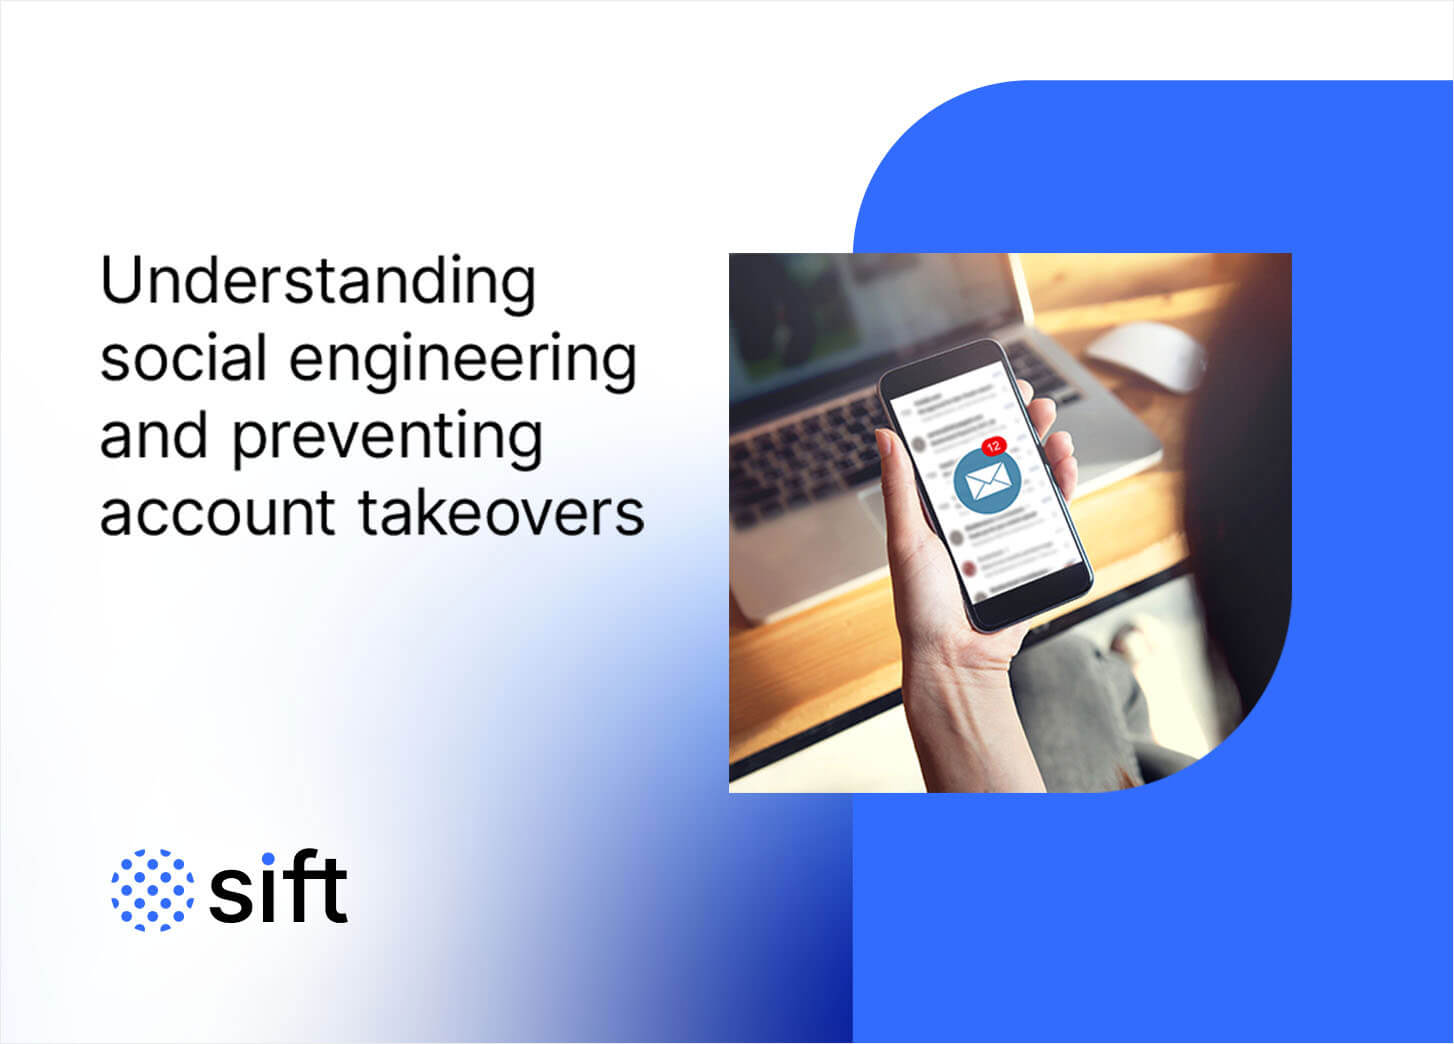 Understanding social engineering and preventing account takeovers – Source: securityboulevard.com